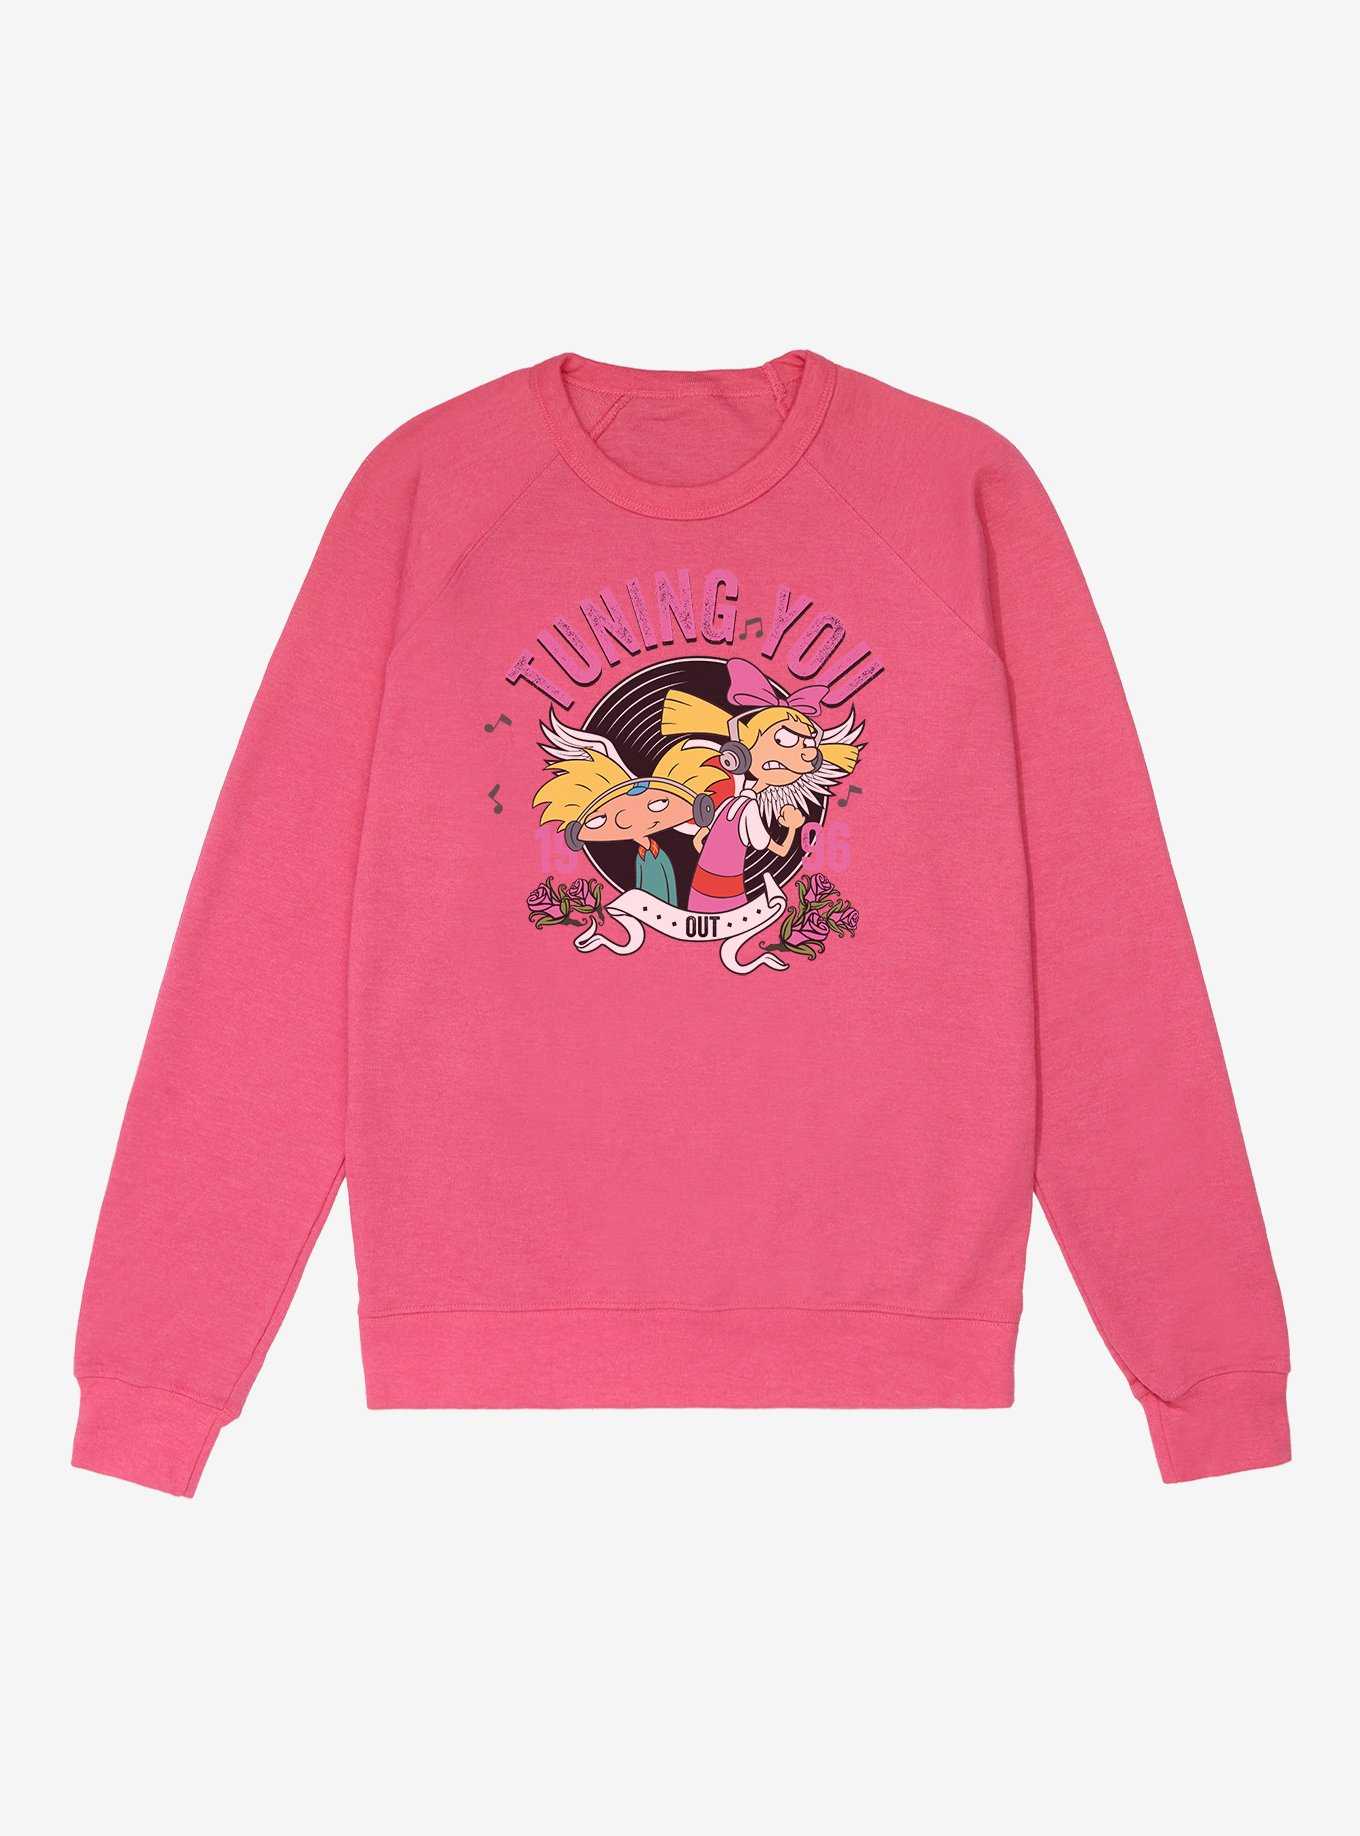 Hey Arnold! Tuning You Out 1996 French Terry Sweatshirt, , hi-res